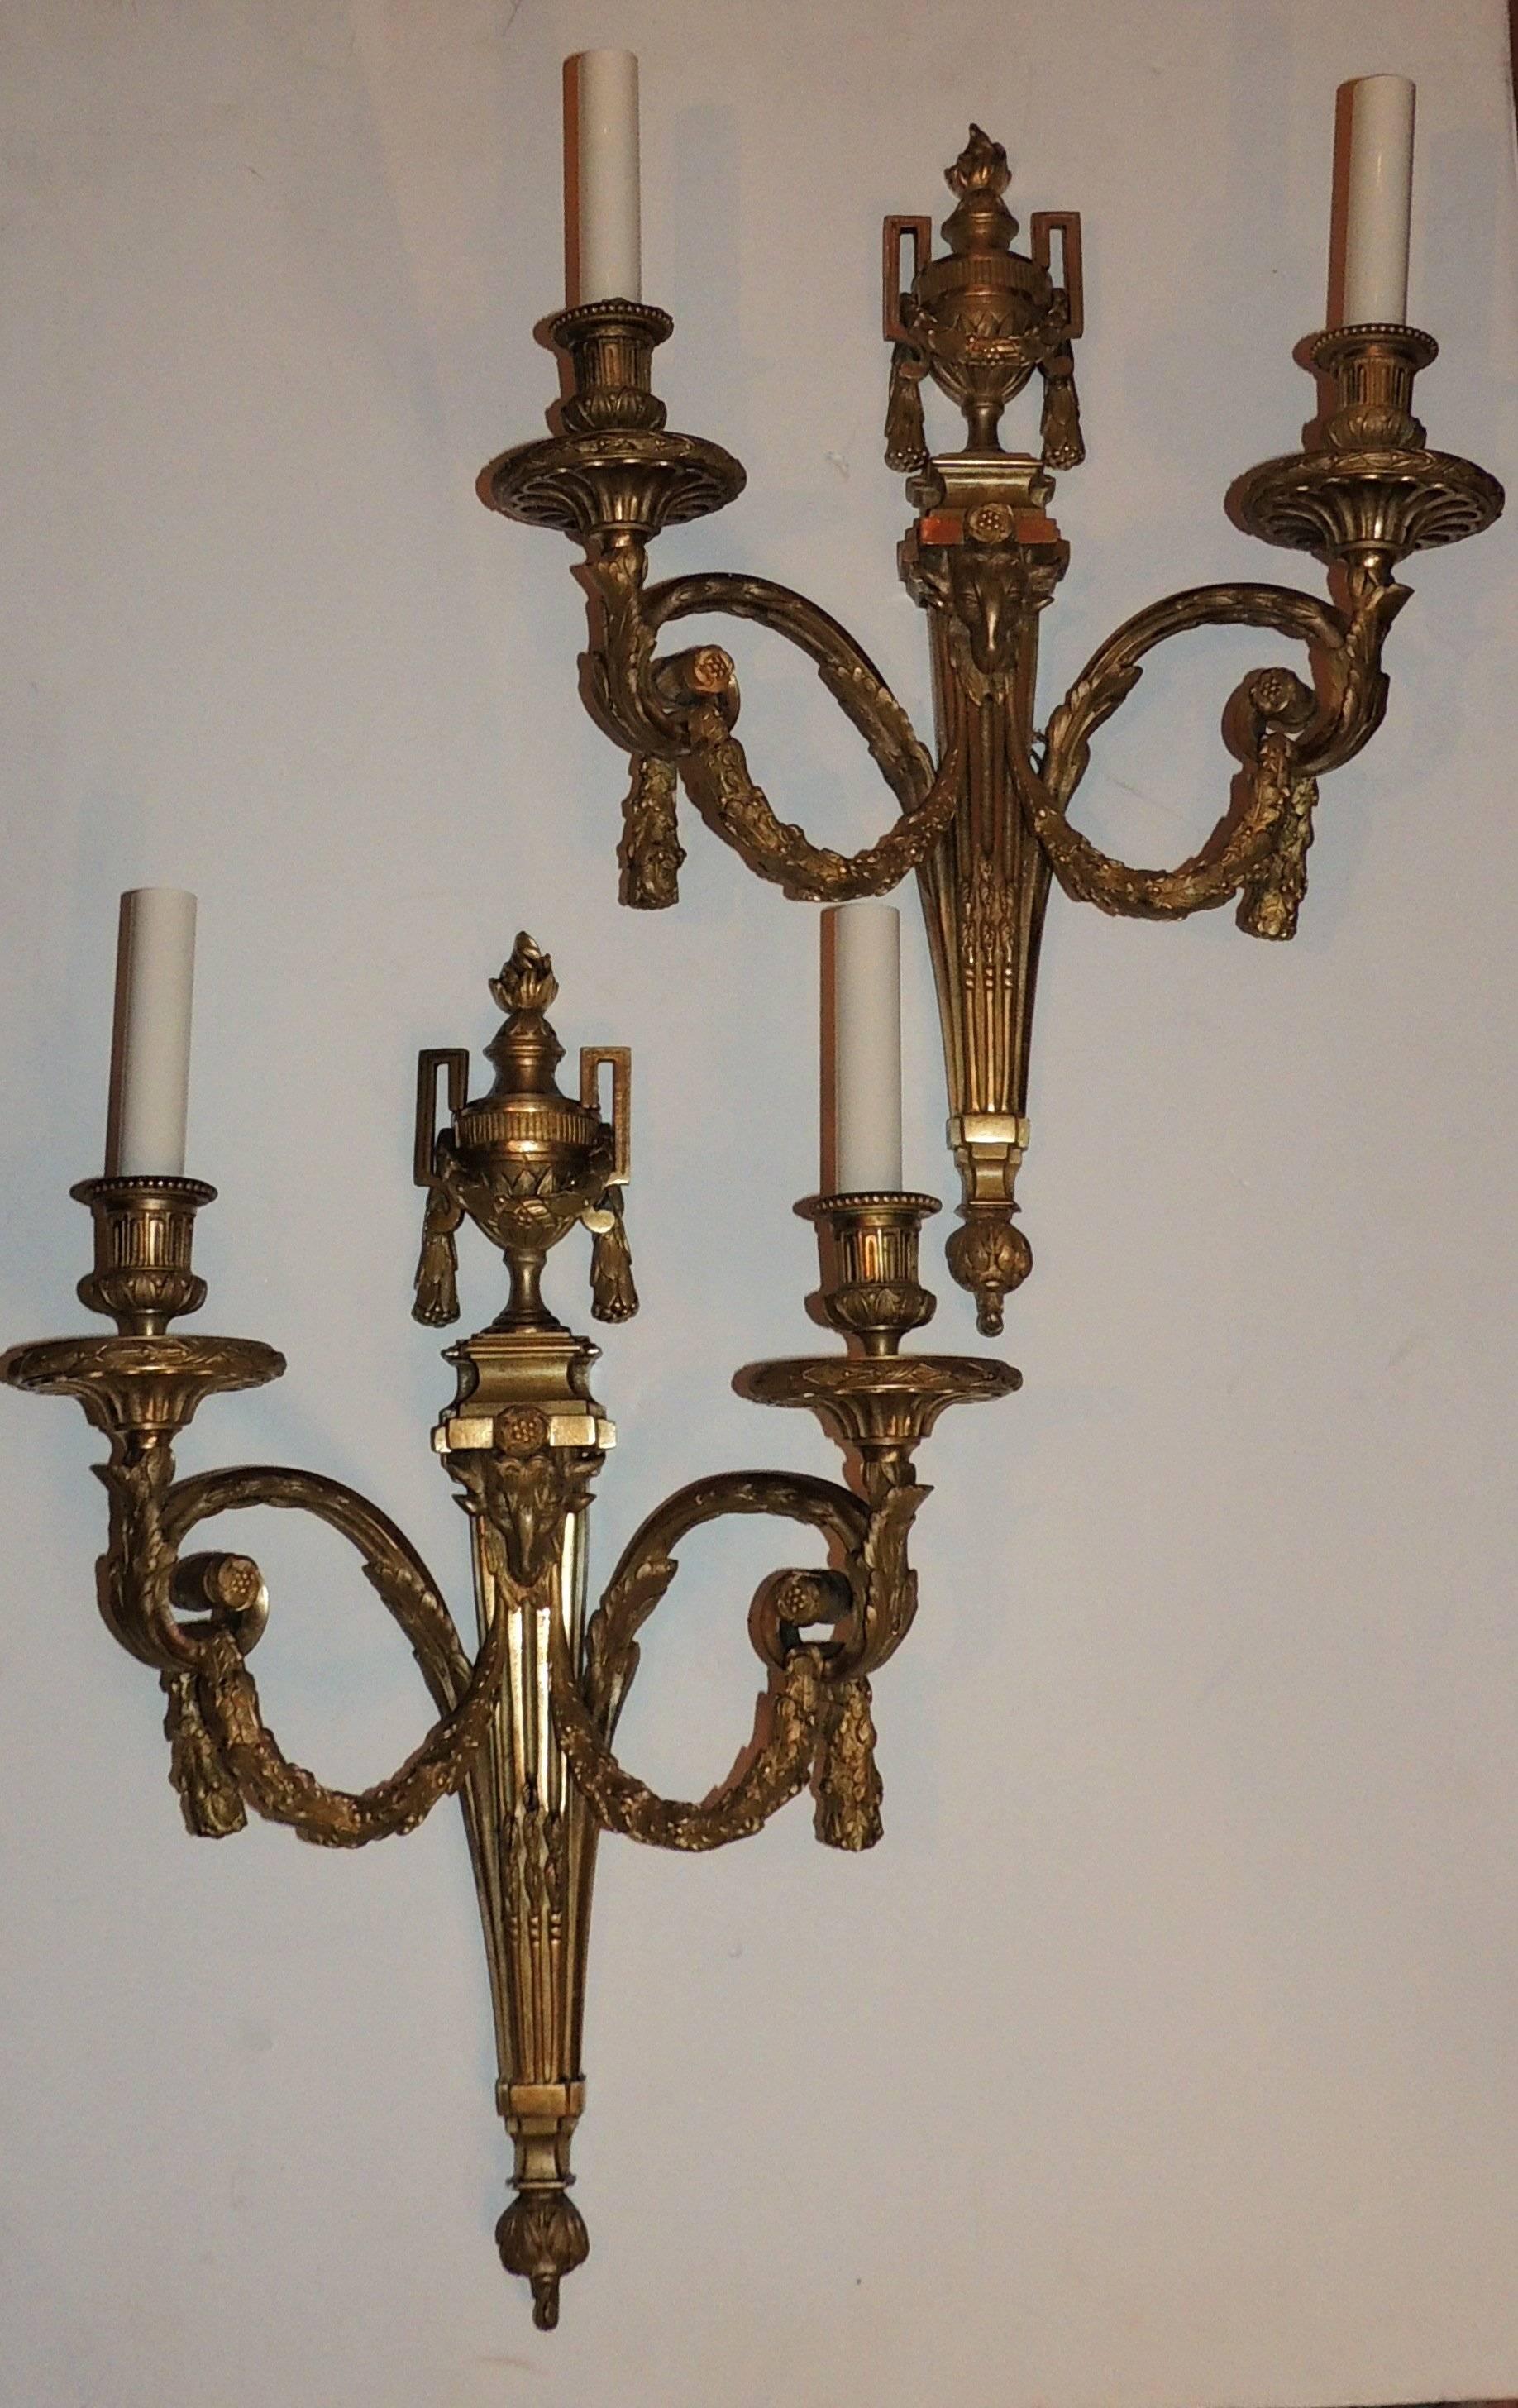 A wonderful Large pair of beautifully etched doré bronze two-arm sconces with filigree draping and swags with fluting detail and decor around the bobeches and a ram's head center medallion of the sconces In the Louis XVI manner.

Measures: 20